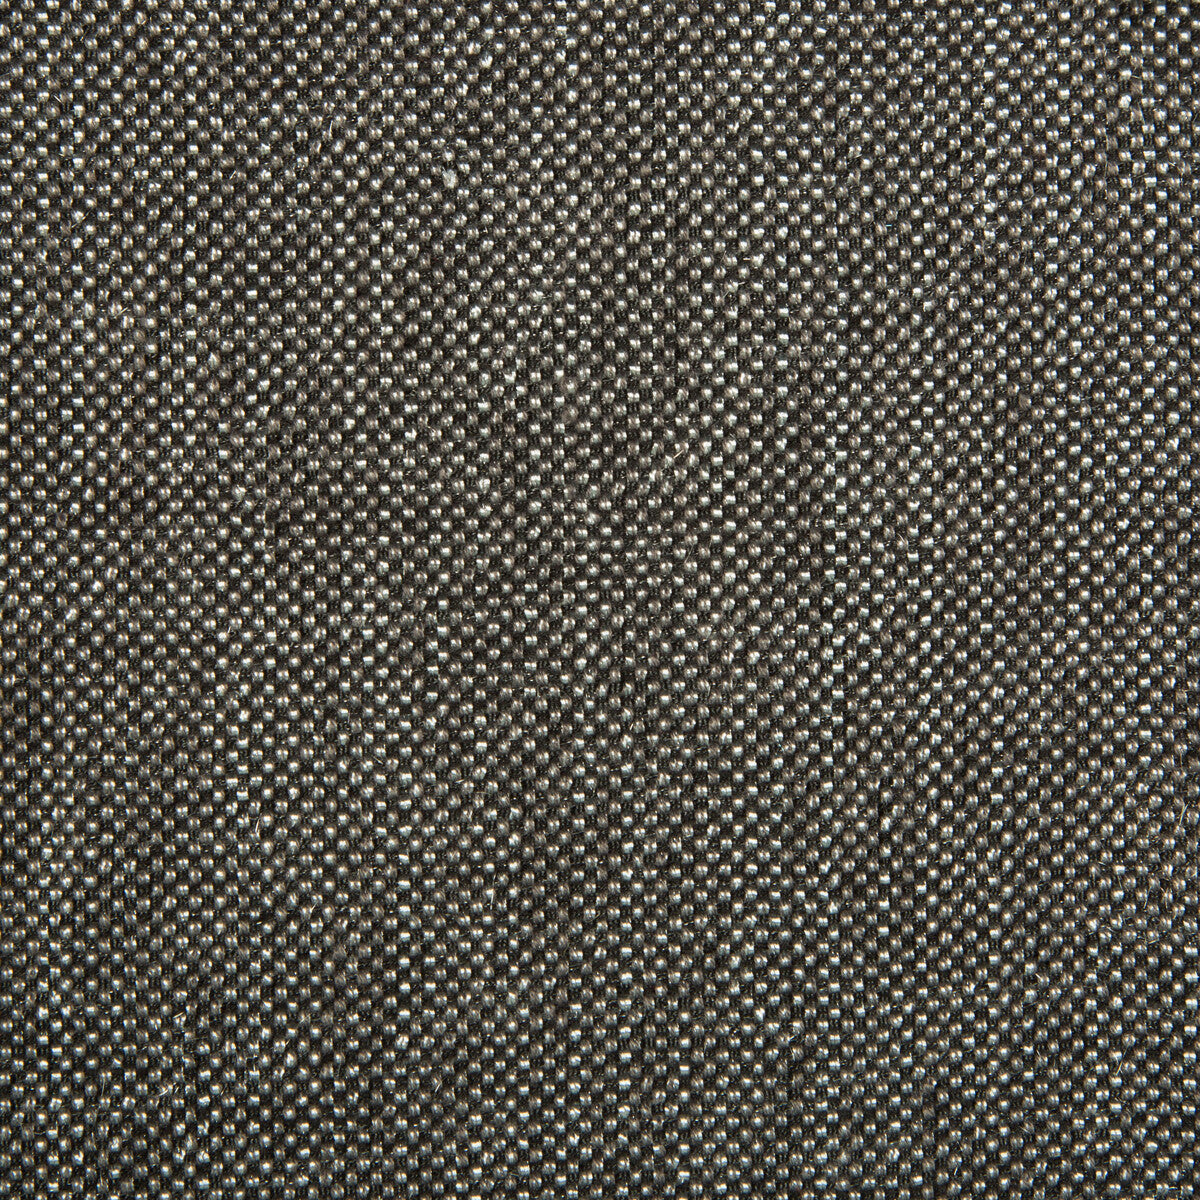 Kravet Contract fabric in 4458-811 color - pattern 4458.811.0 - by Kravet Contract